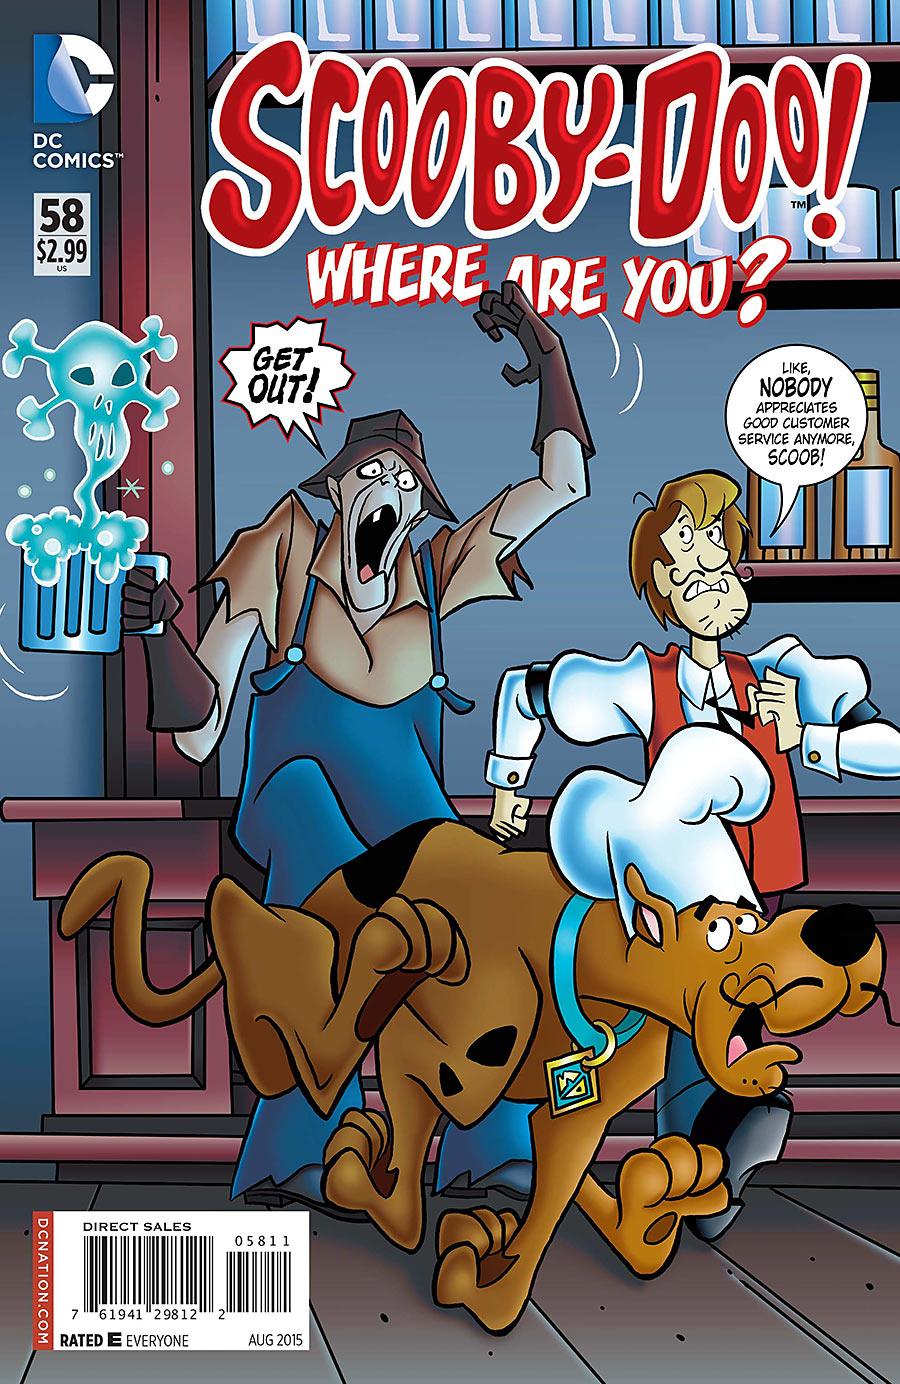 Scooby-Doo: Where Are You? Vol. 1 #58